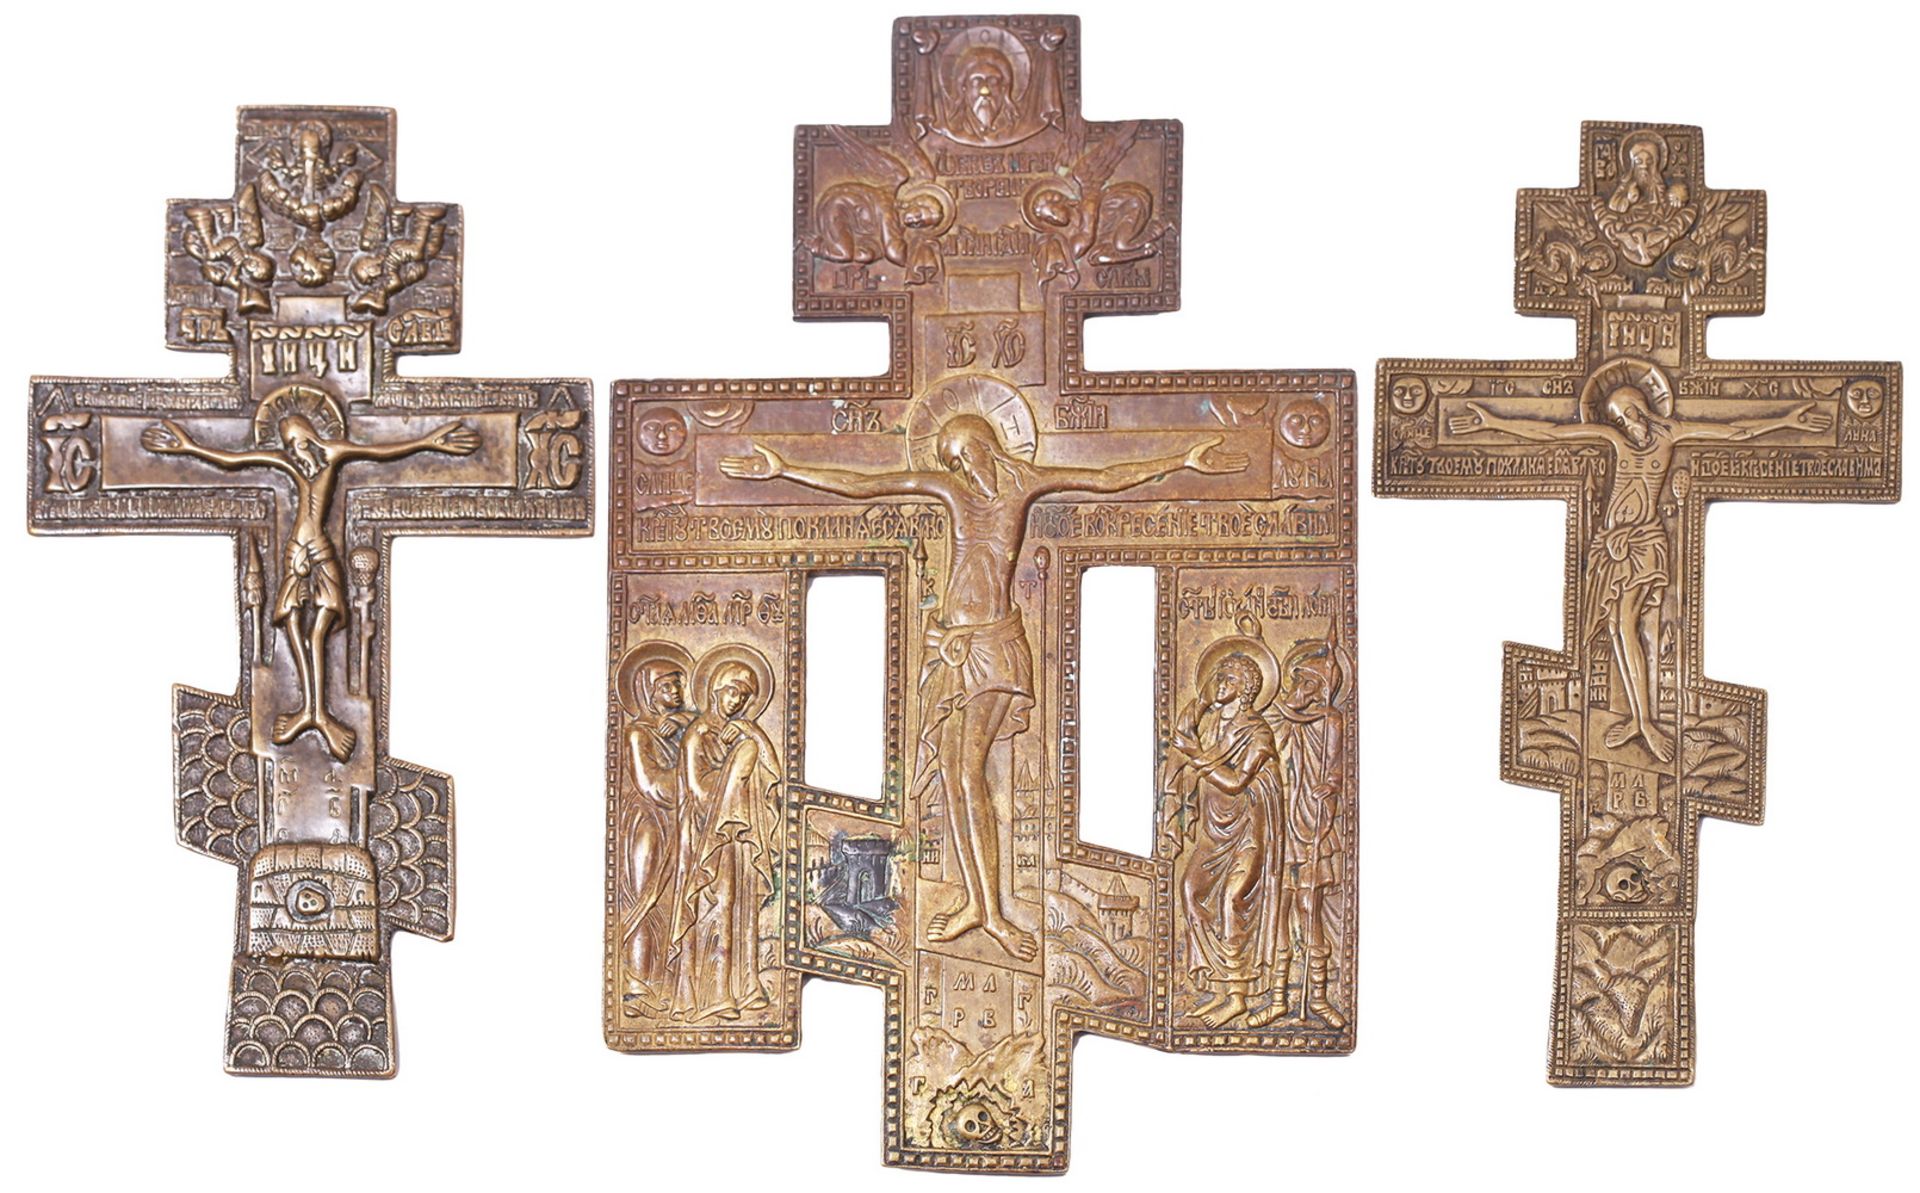 Three brass crucifix. - Russia, 19th century. Size: from 20x11 to 23x15 cm.